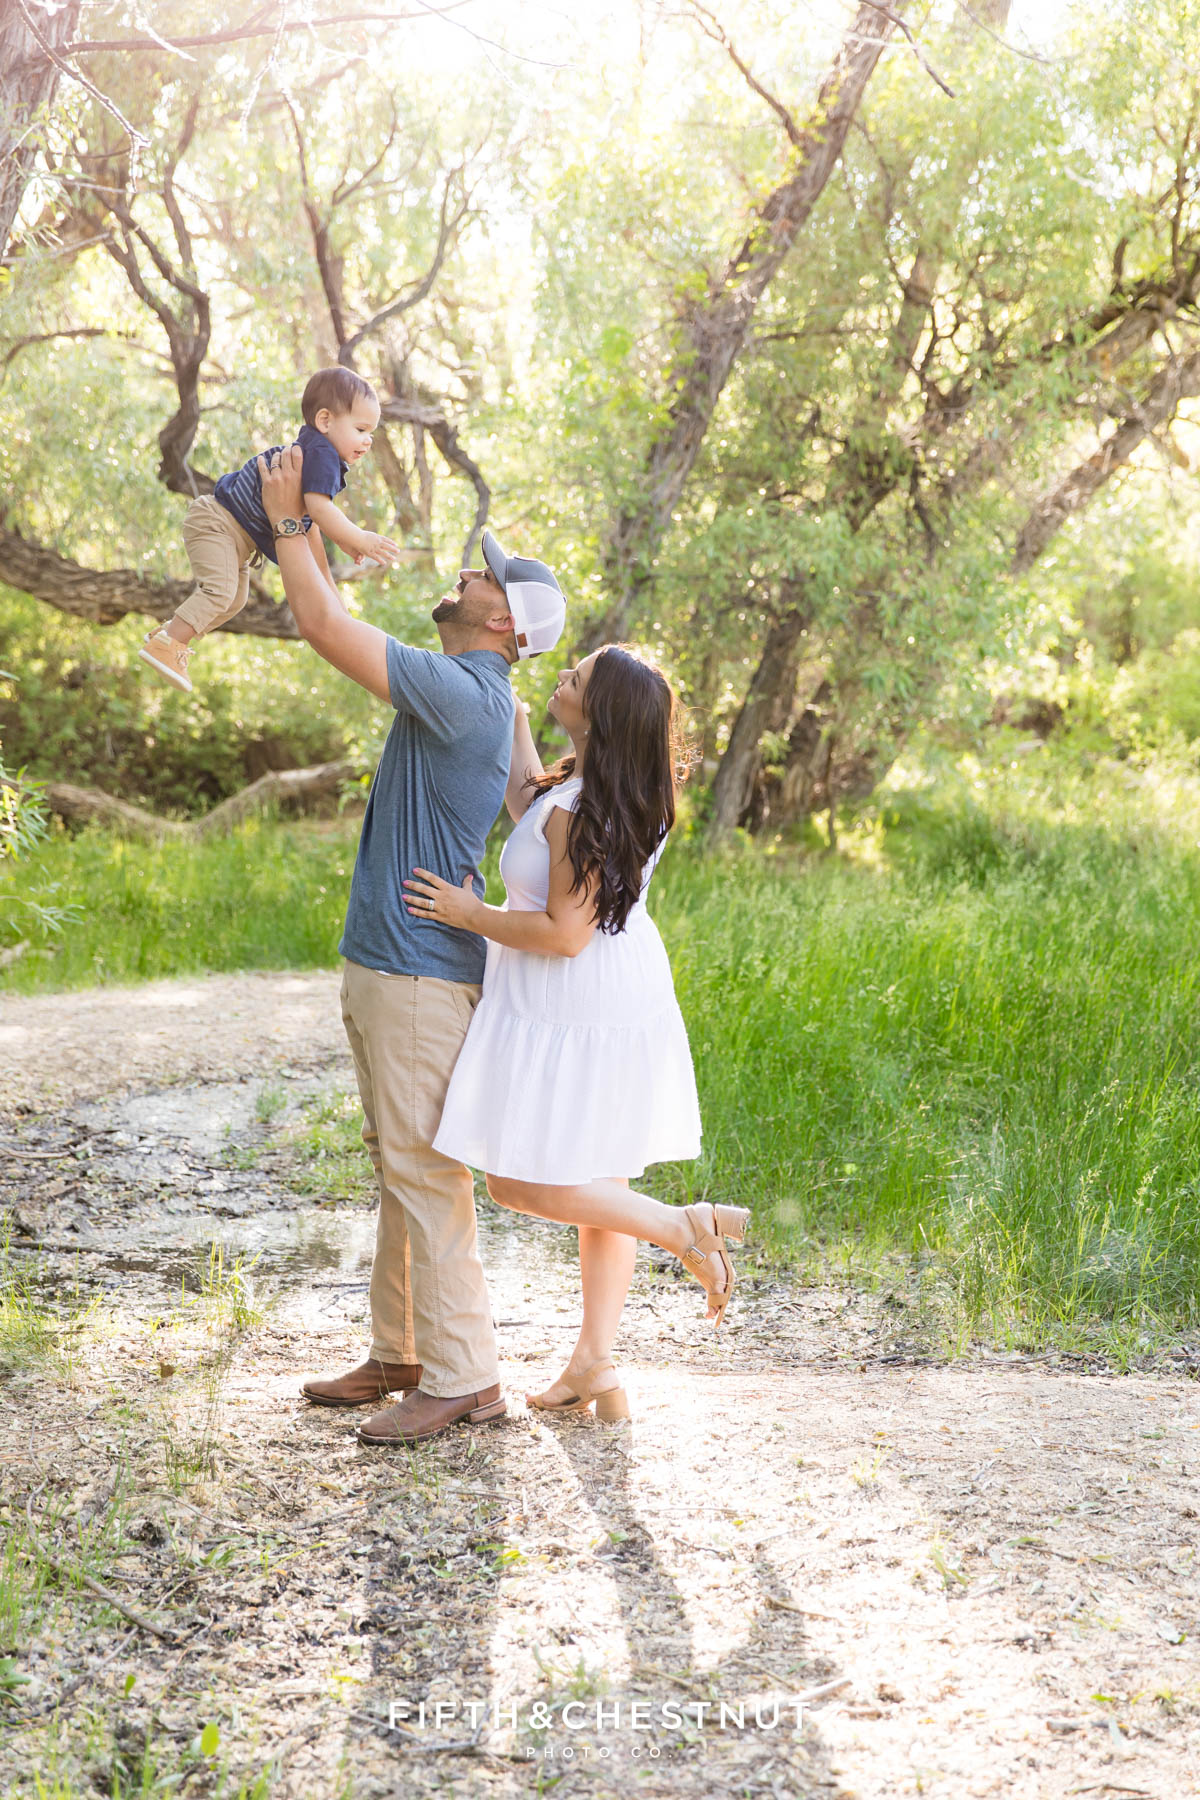 A dad holds up his one year old sone wearing a striped blue shirt with a meadow and trees behind them as his wife embraces him while wearing a white dress